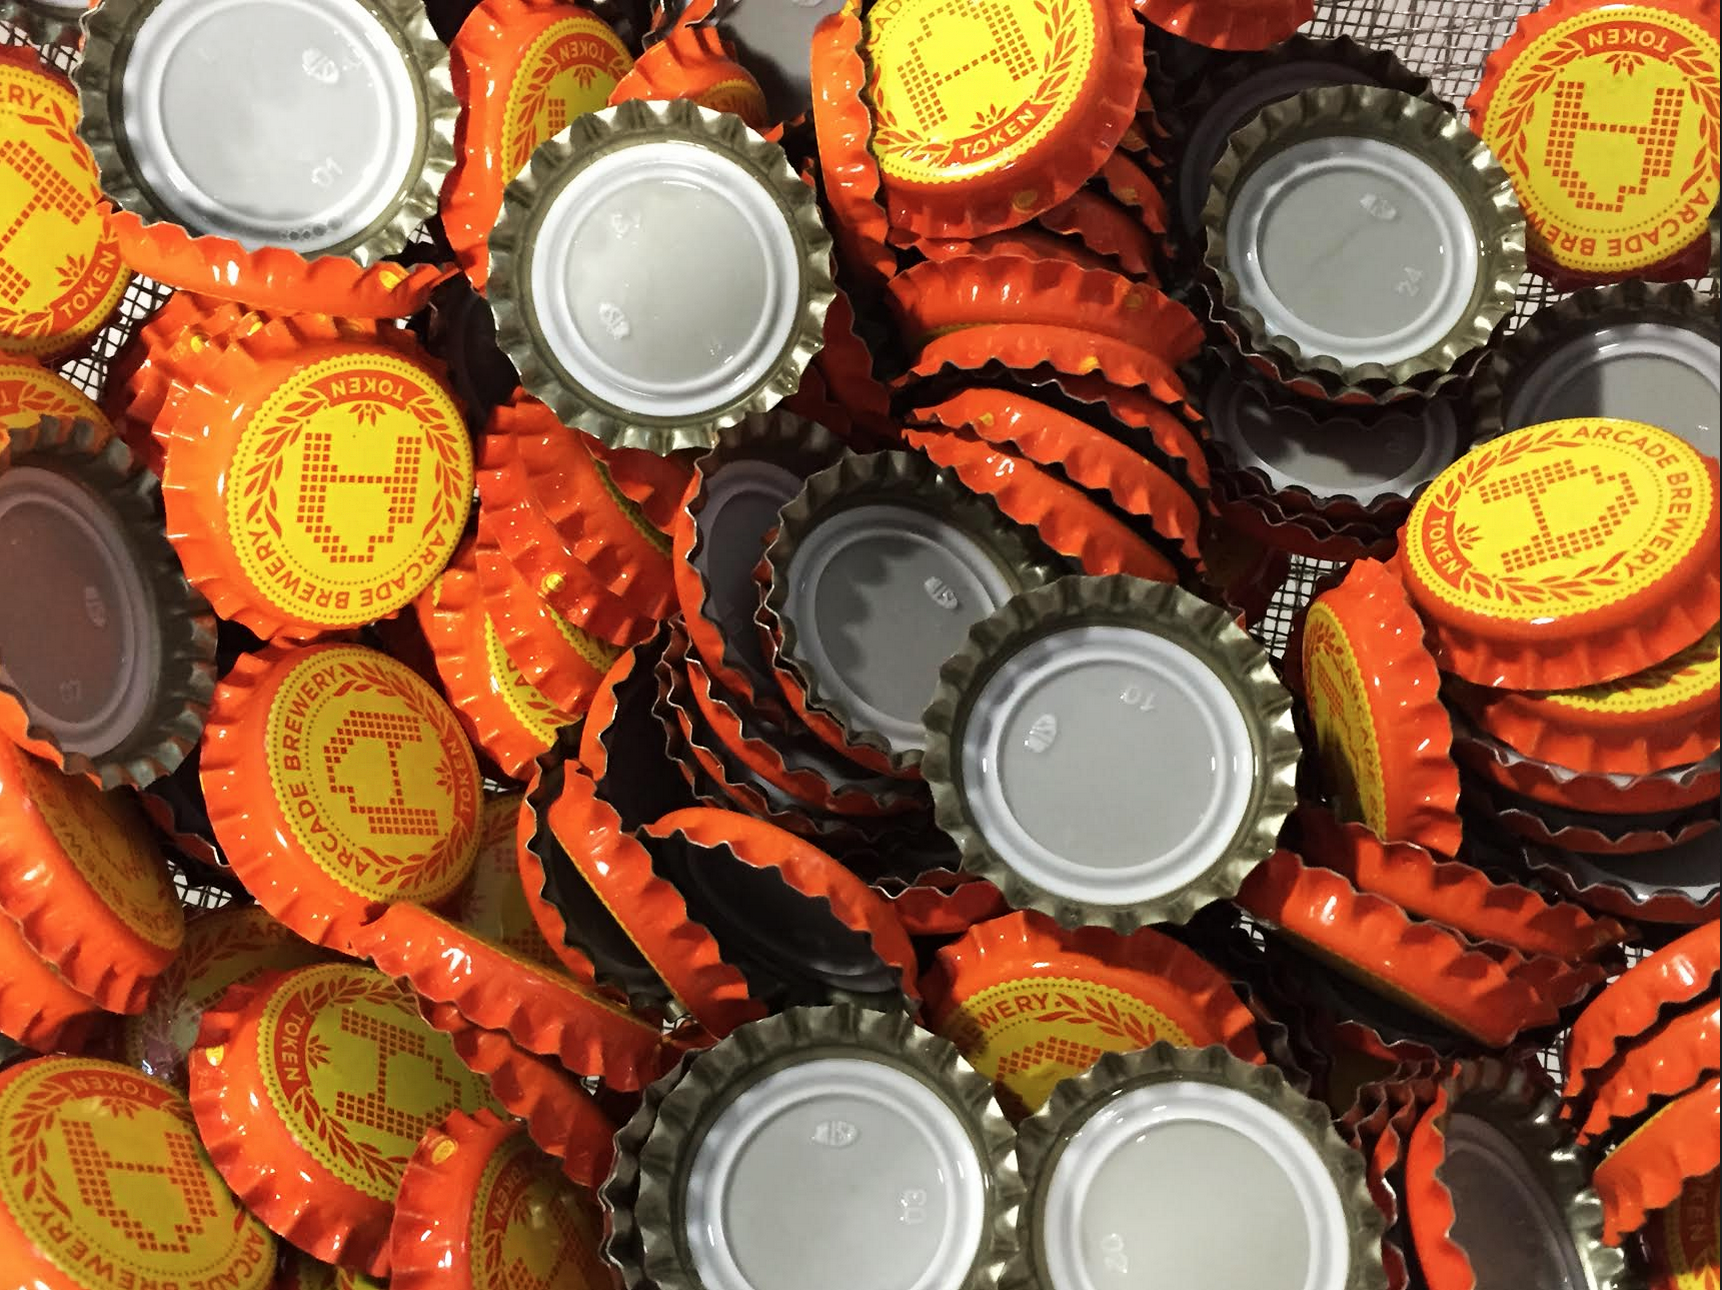 Bottlecaps or game tokens? Why not both!